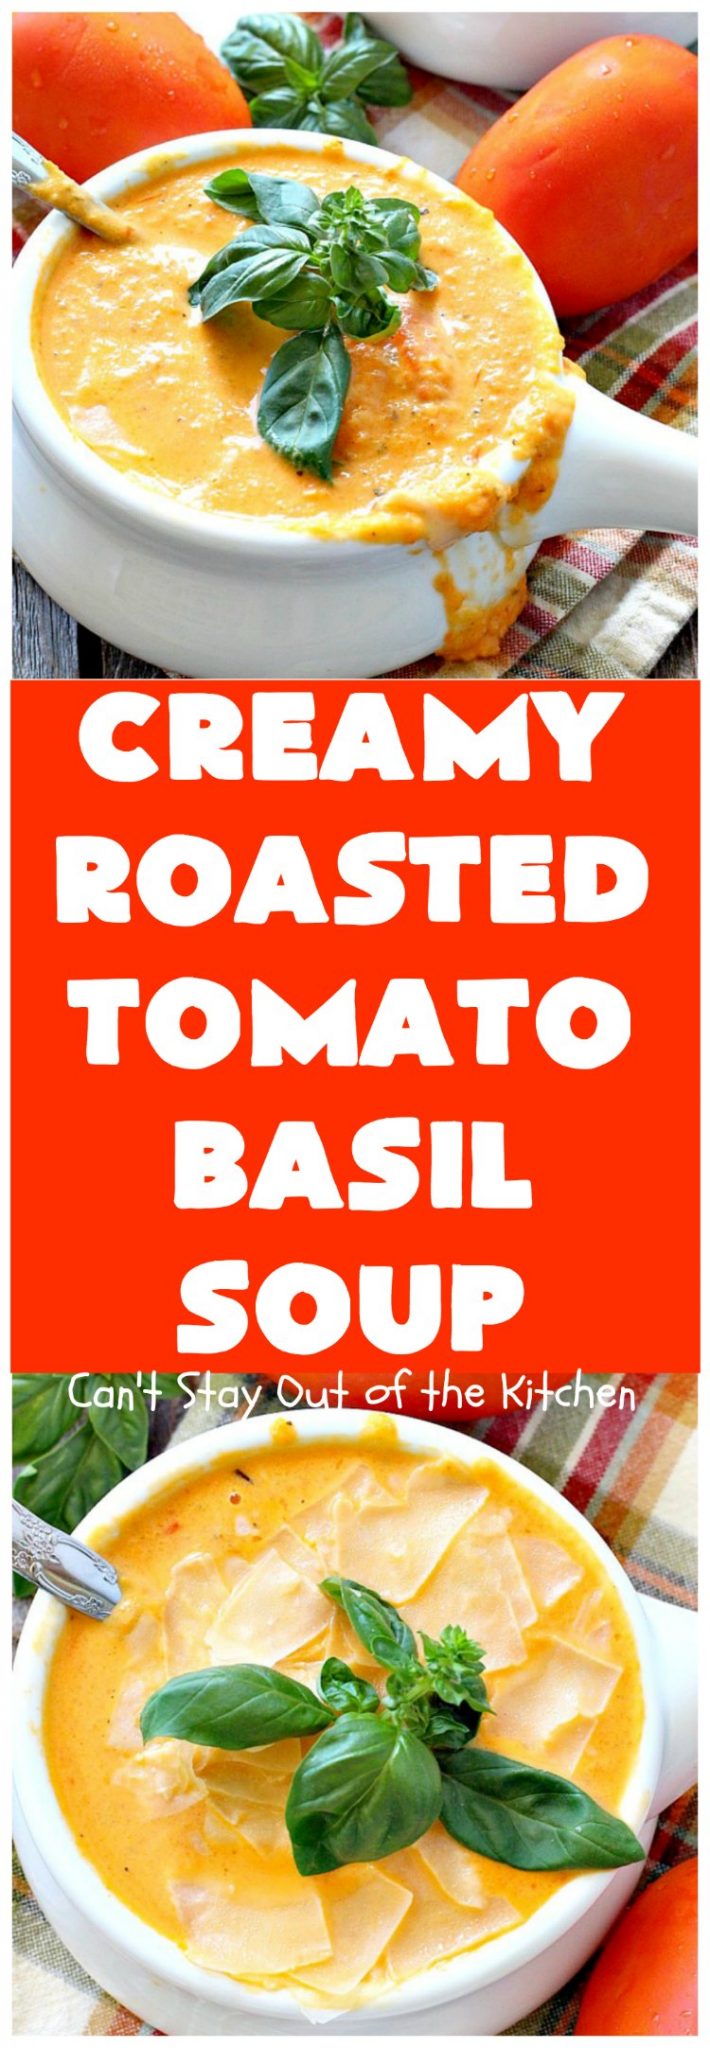 Creamy Roasted Tomato Basil Soup – Can't Stay Out of the Kitchen